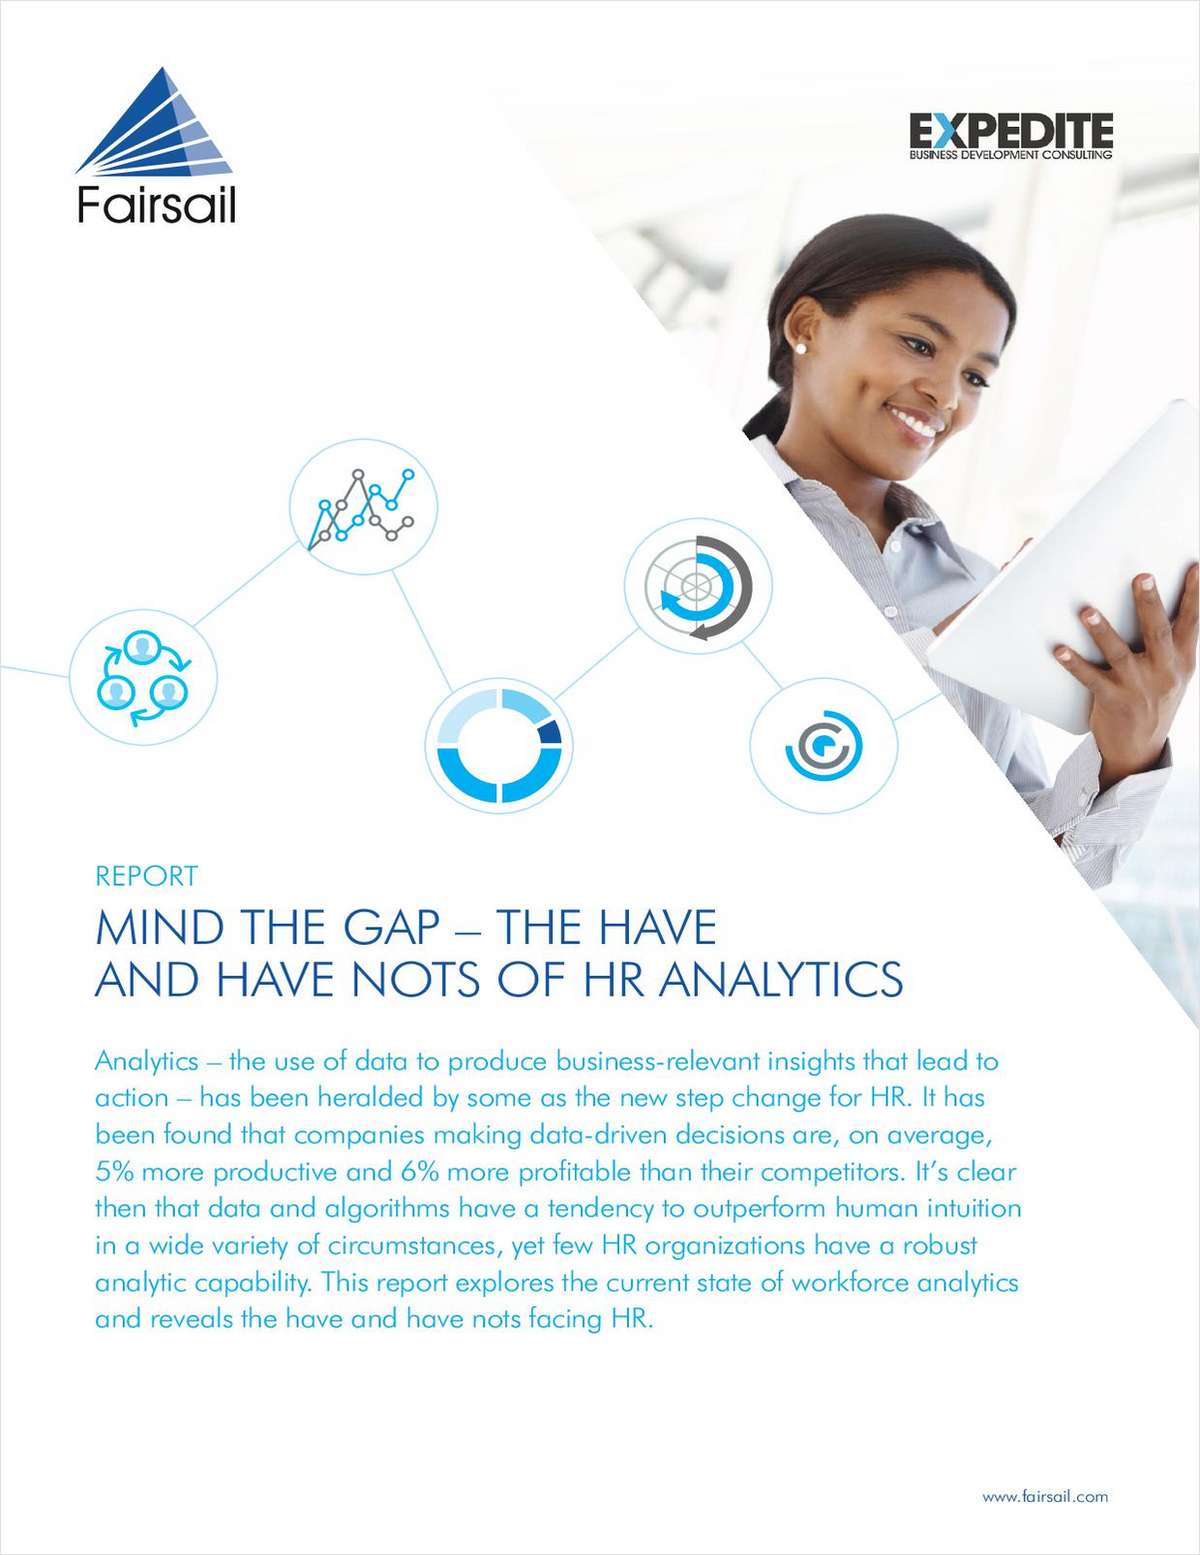 Mind the Gap: The Have and Have Nots of HR Analytics